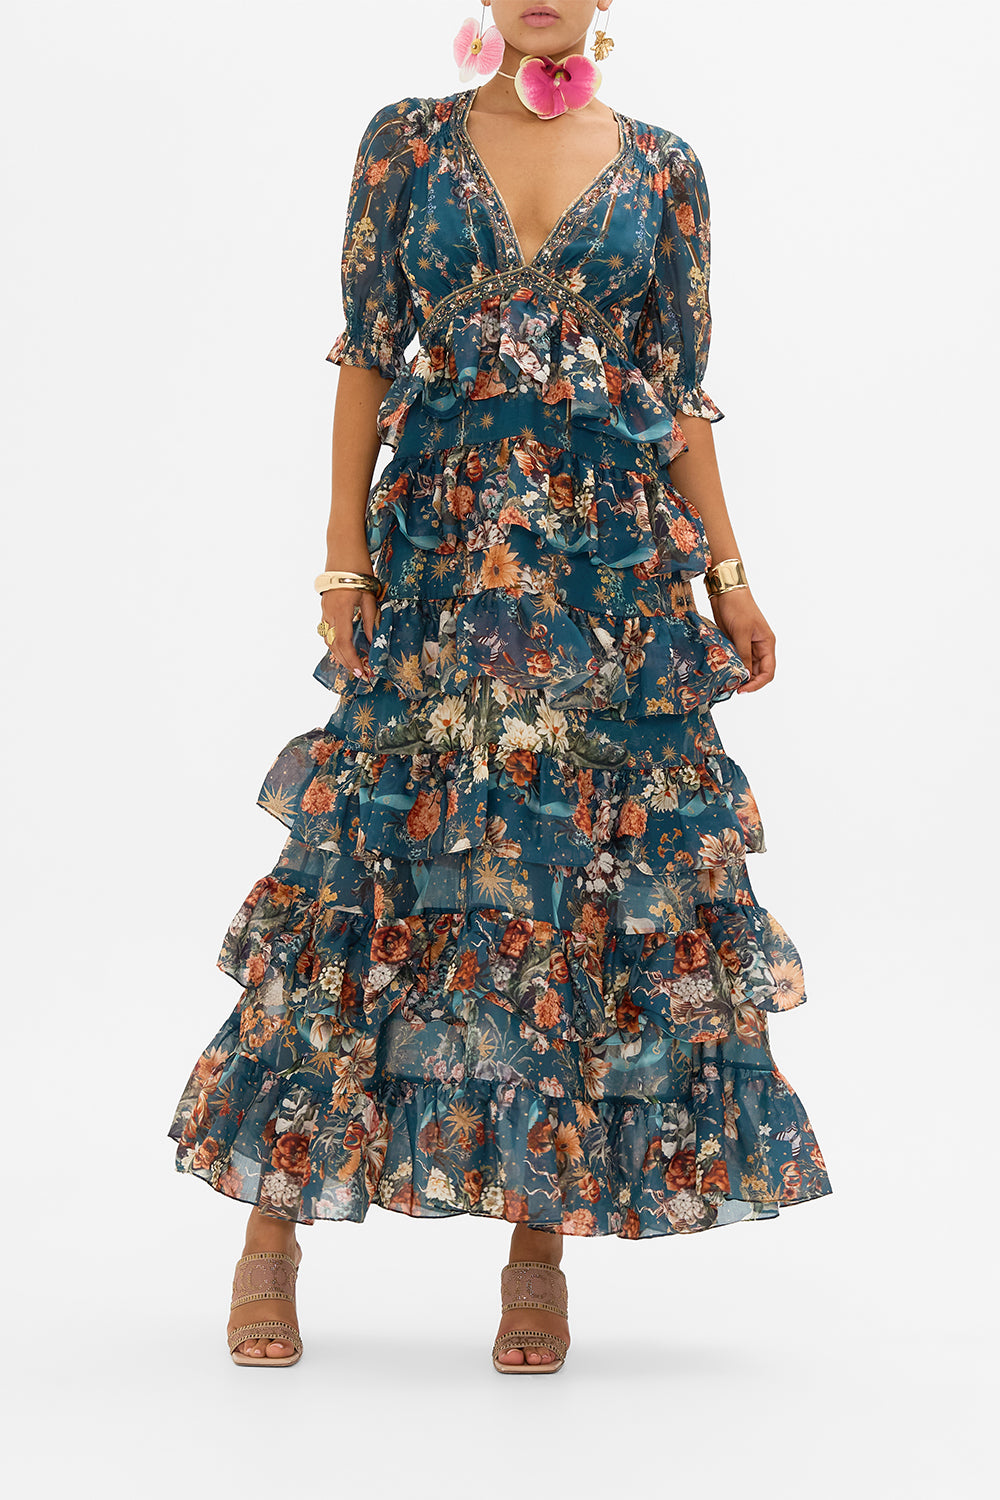 CAMILLA puff sleeve maxi dress in She Who Wears The Crown print